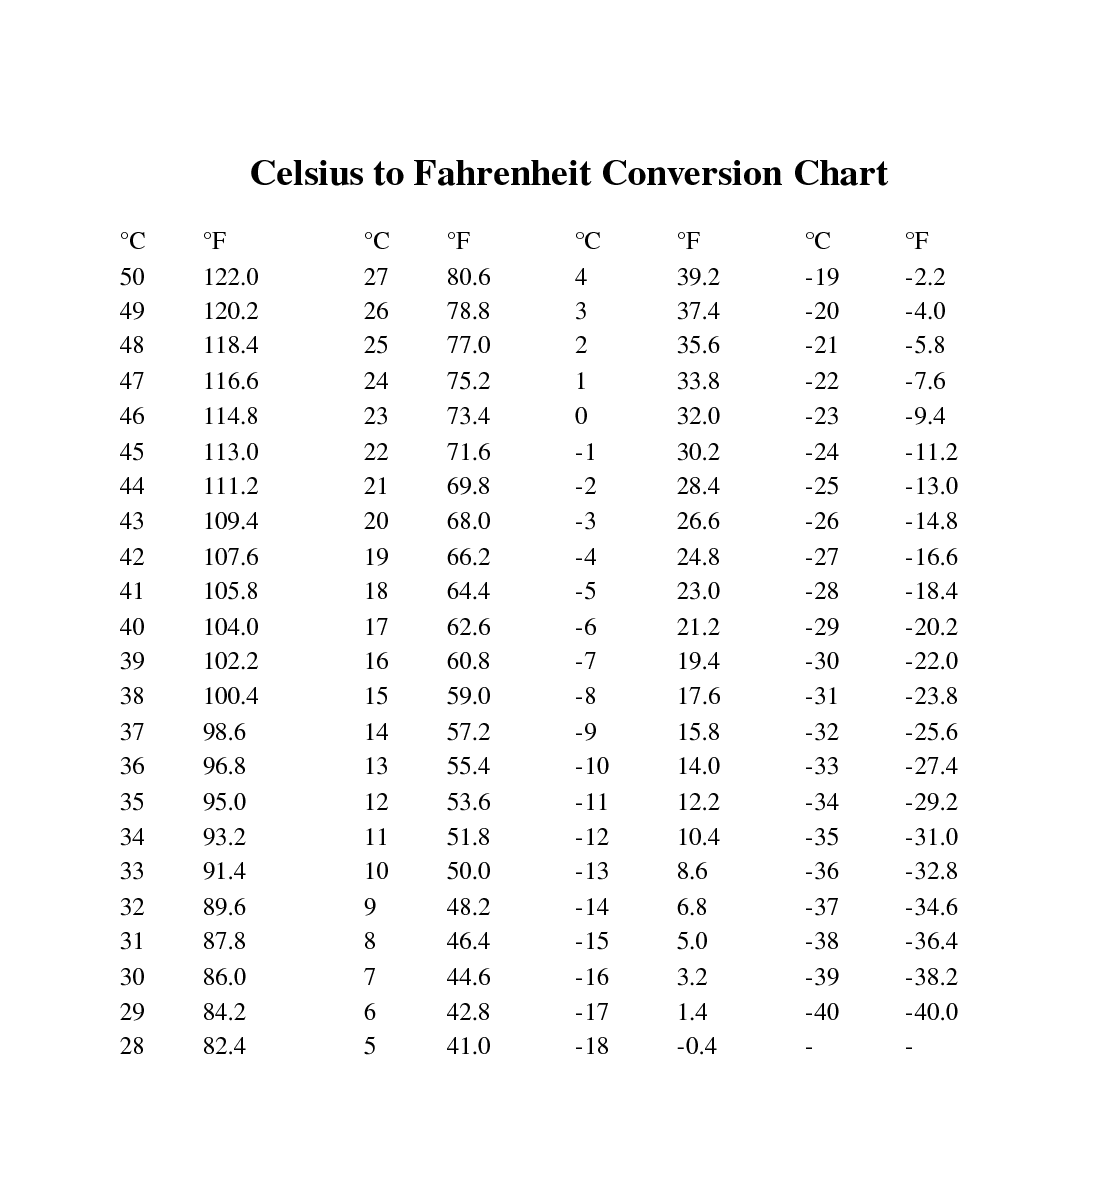 celsius-to-fahrenheit-chart-conversion-digitally-credible-calendars-degrees-celsius-to